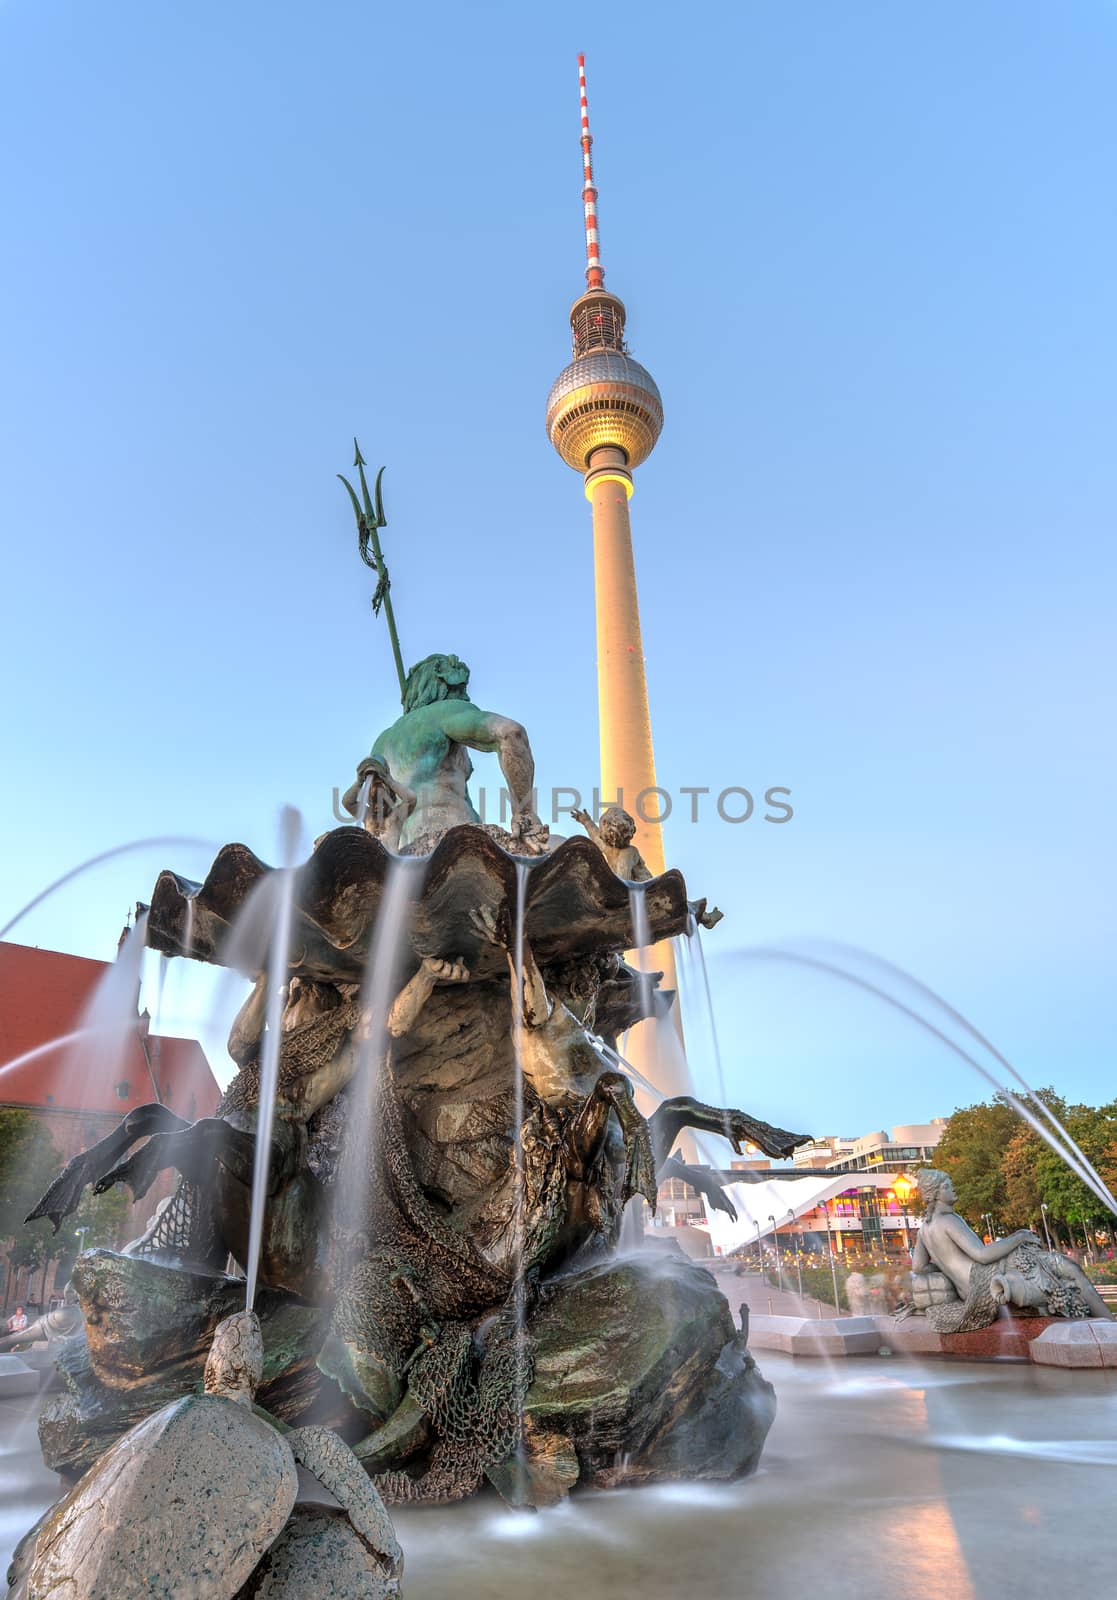 The Neptune fountain and the TV Tower in Berlin at twilight